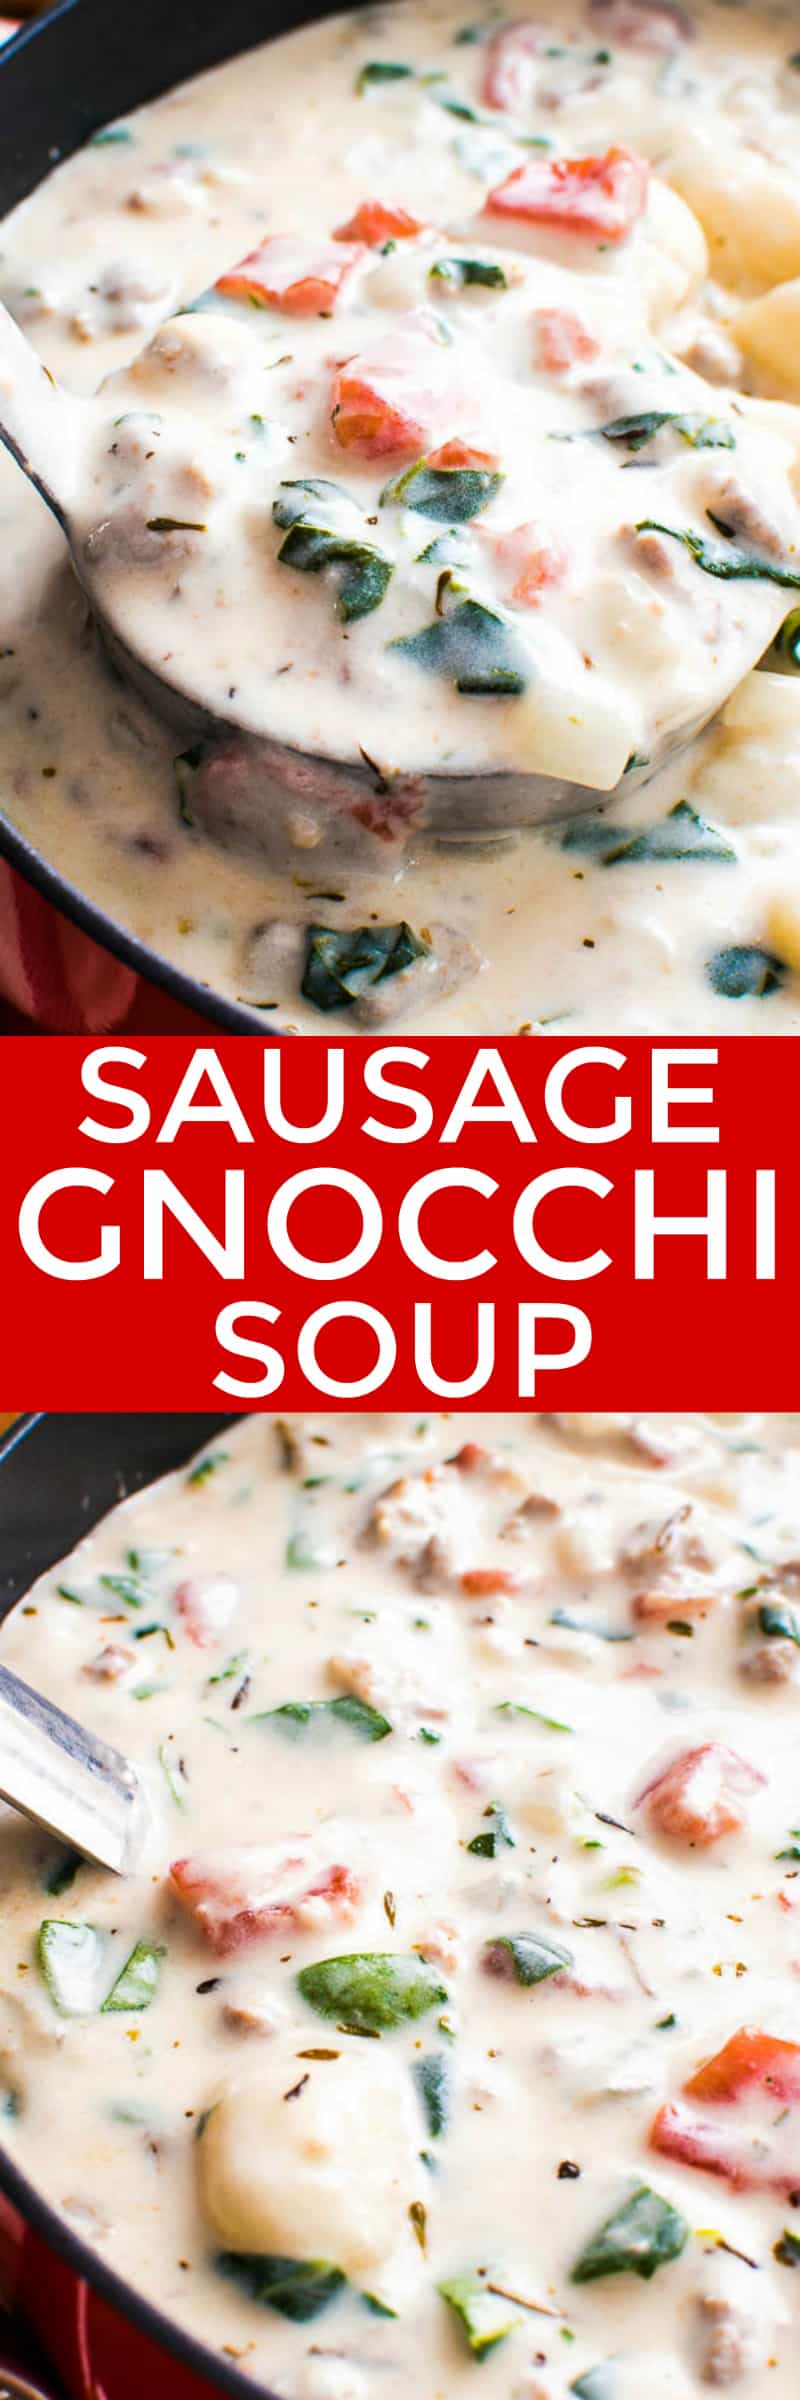 Creamy Sausage Gnocchi Soup combines the delicious flavors of Italian Sausage, tomatoes, spinach, and gnocchi in a deliciously creamy, flavor-packed soup.